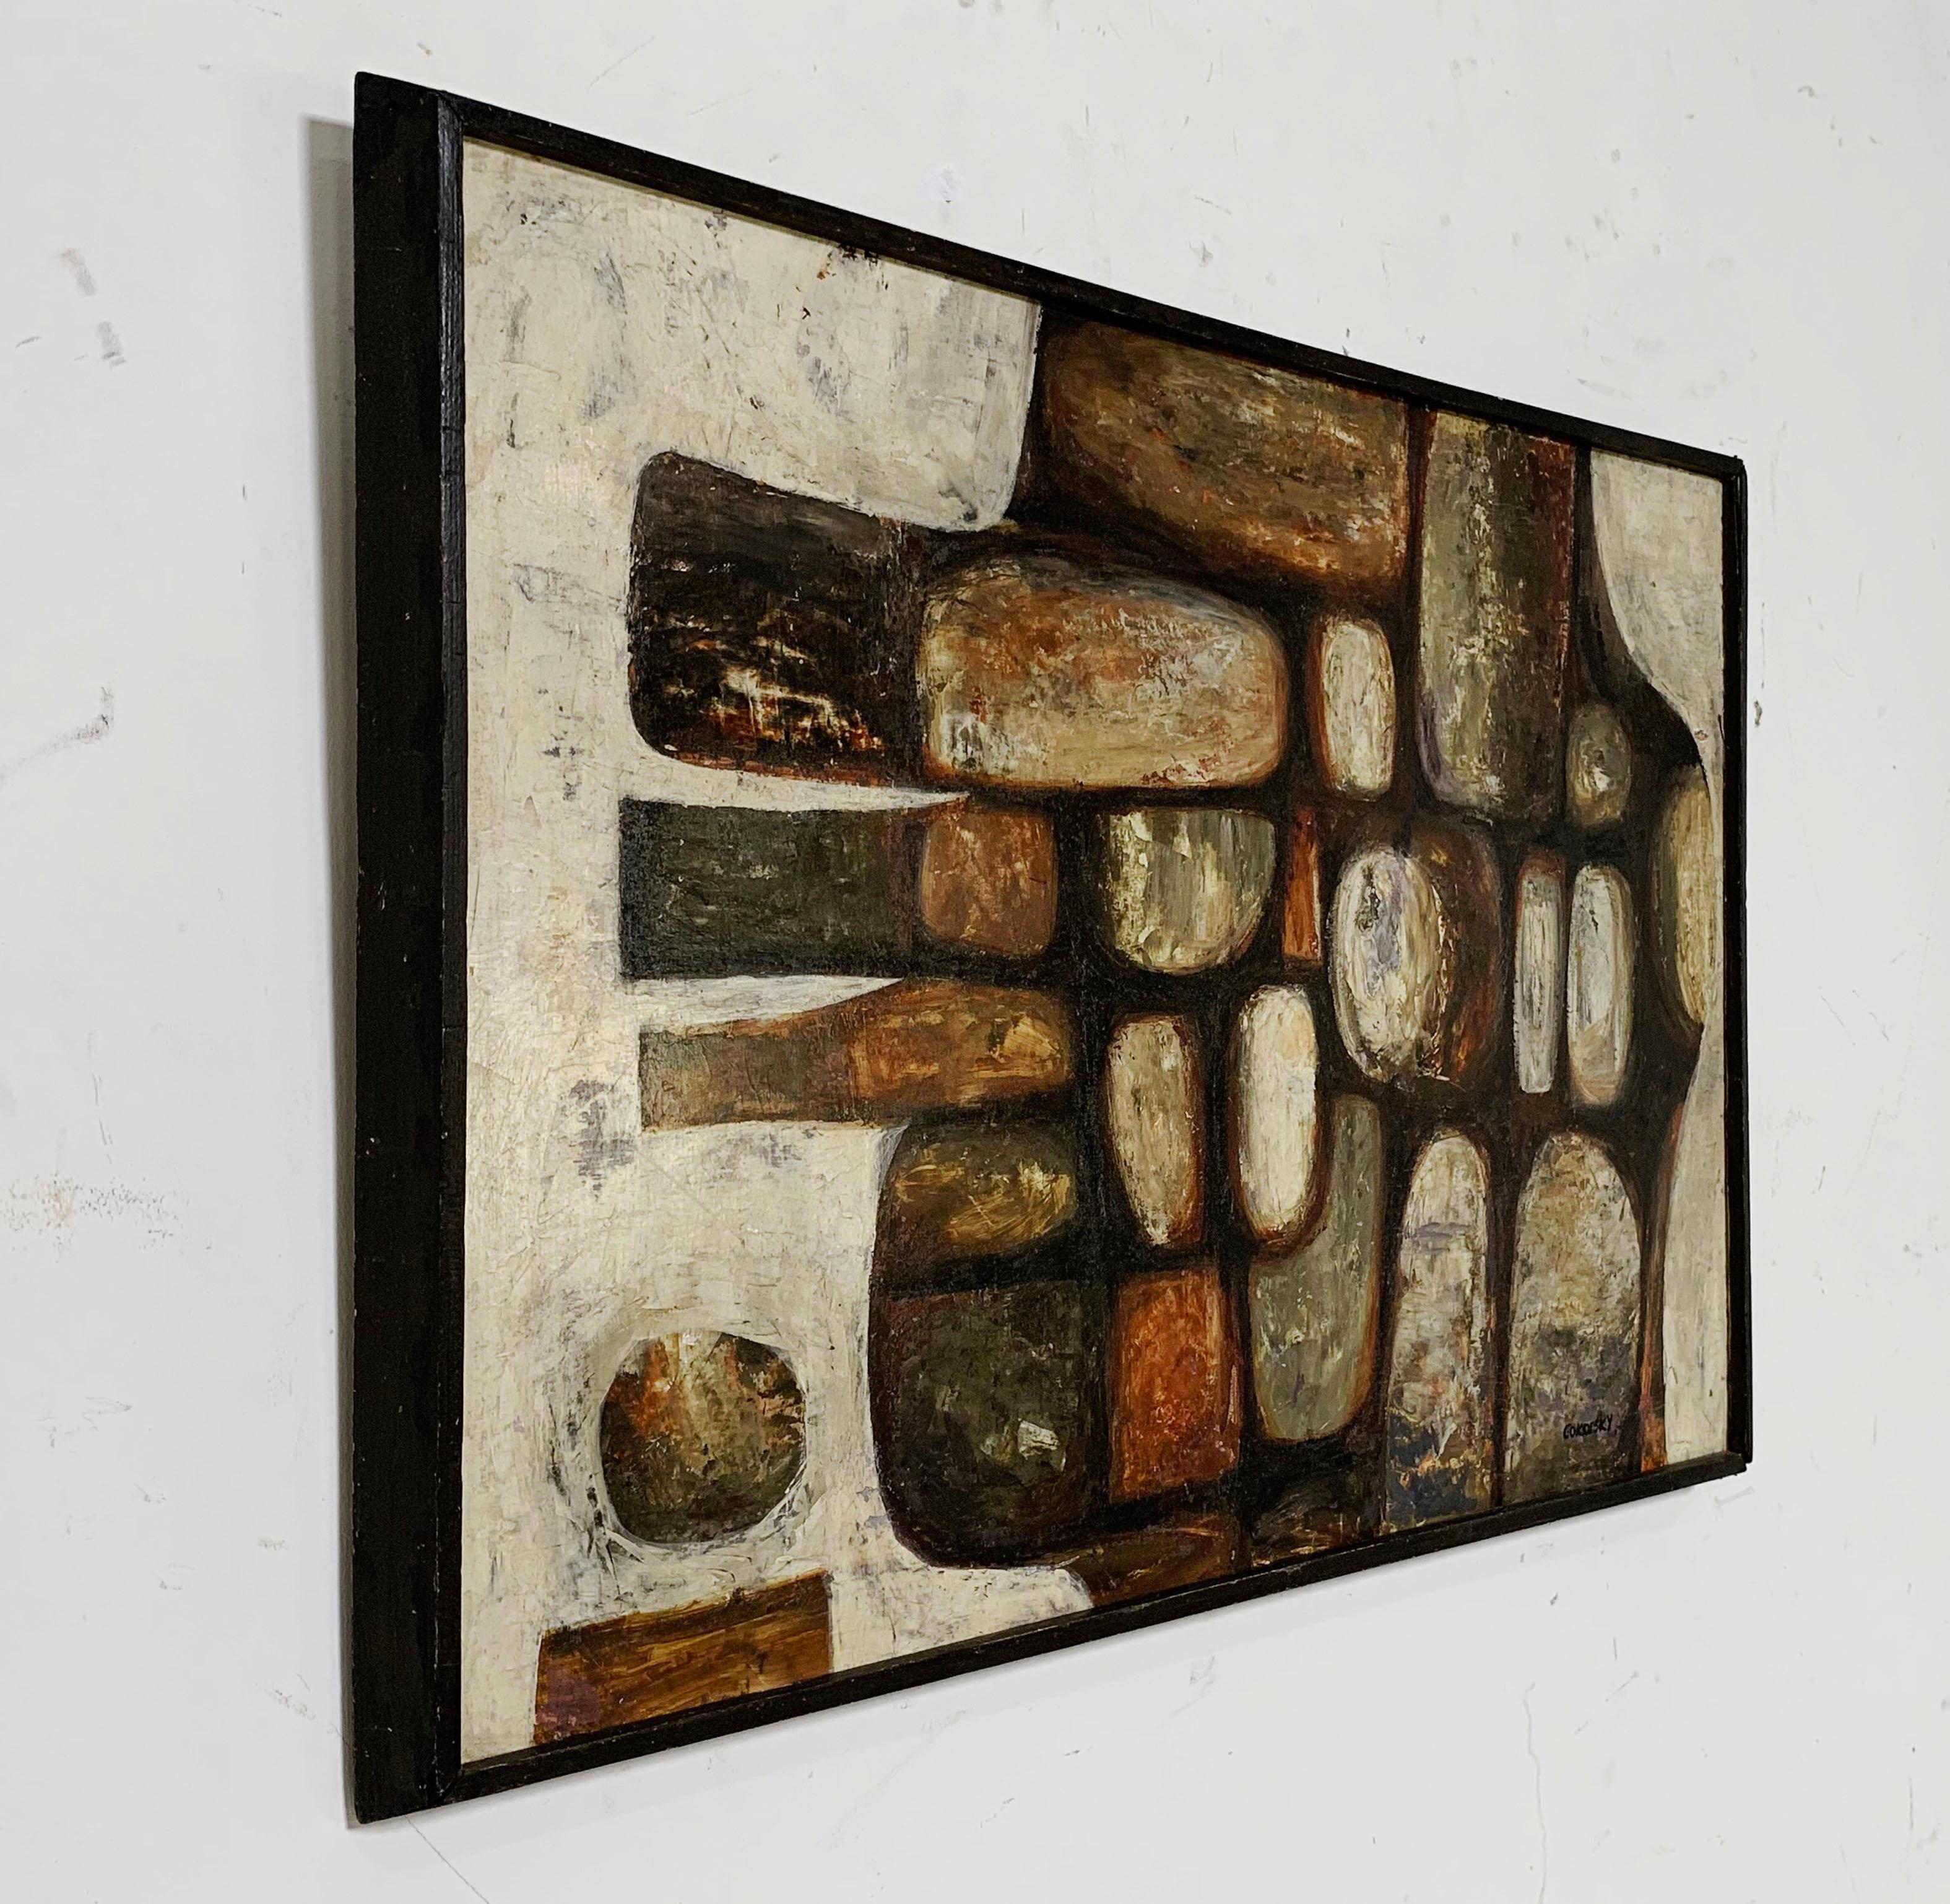 A biomorphic composition of abstract organic shapes structured in loose brickwork assemblage, oil on board signed Gokorsky, circa 1970s.